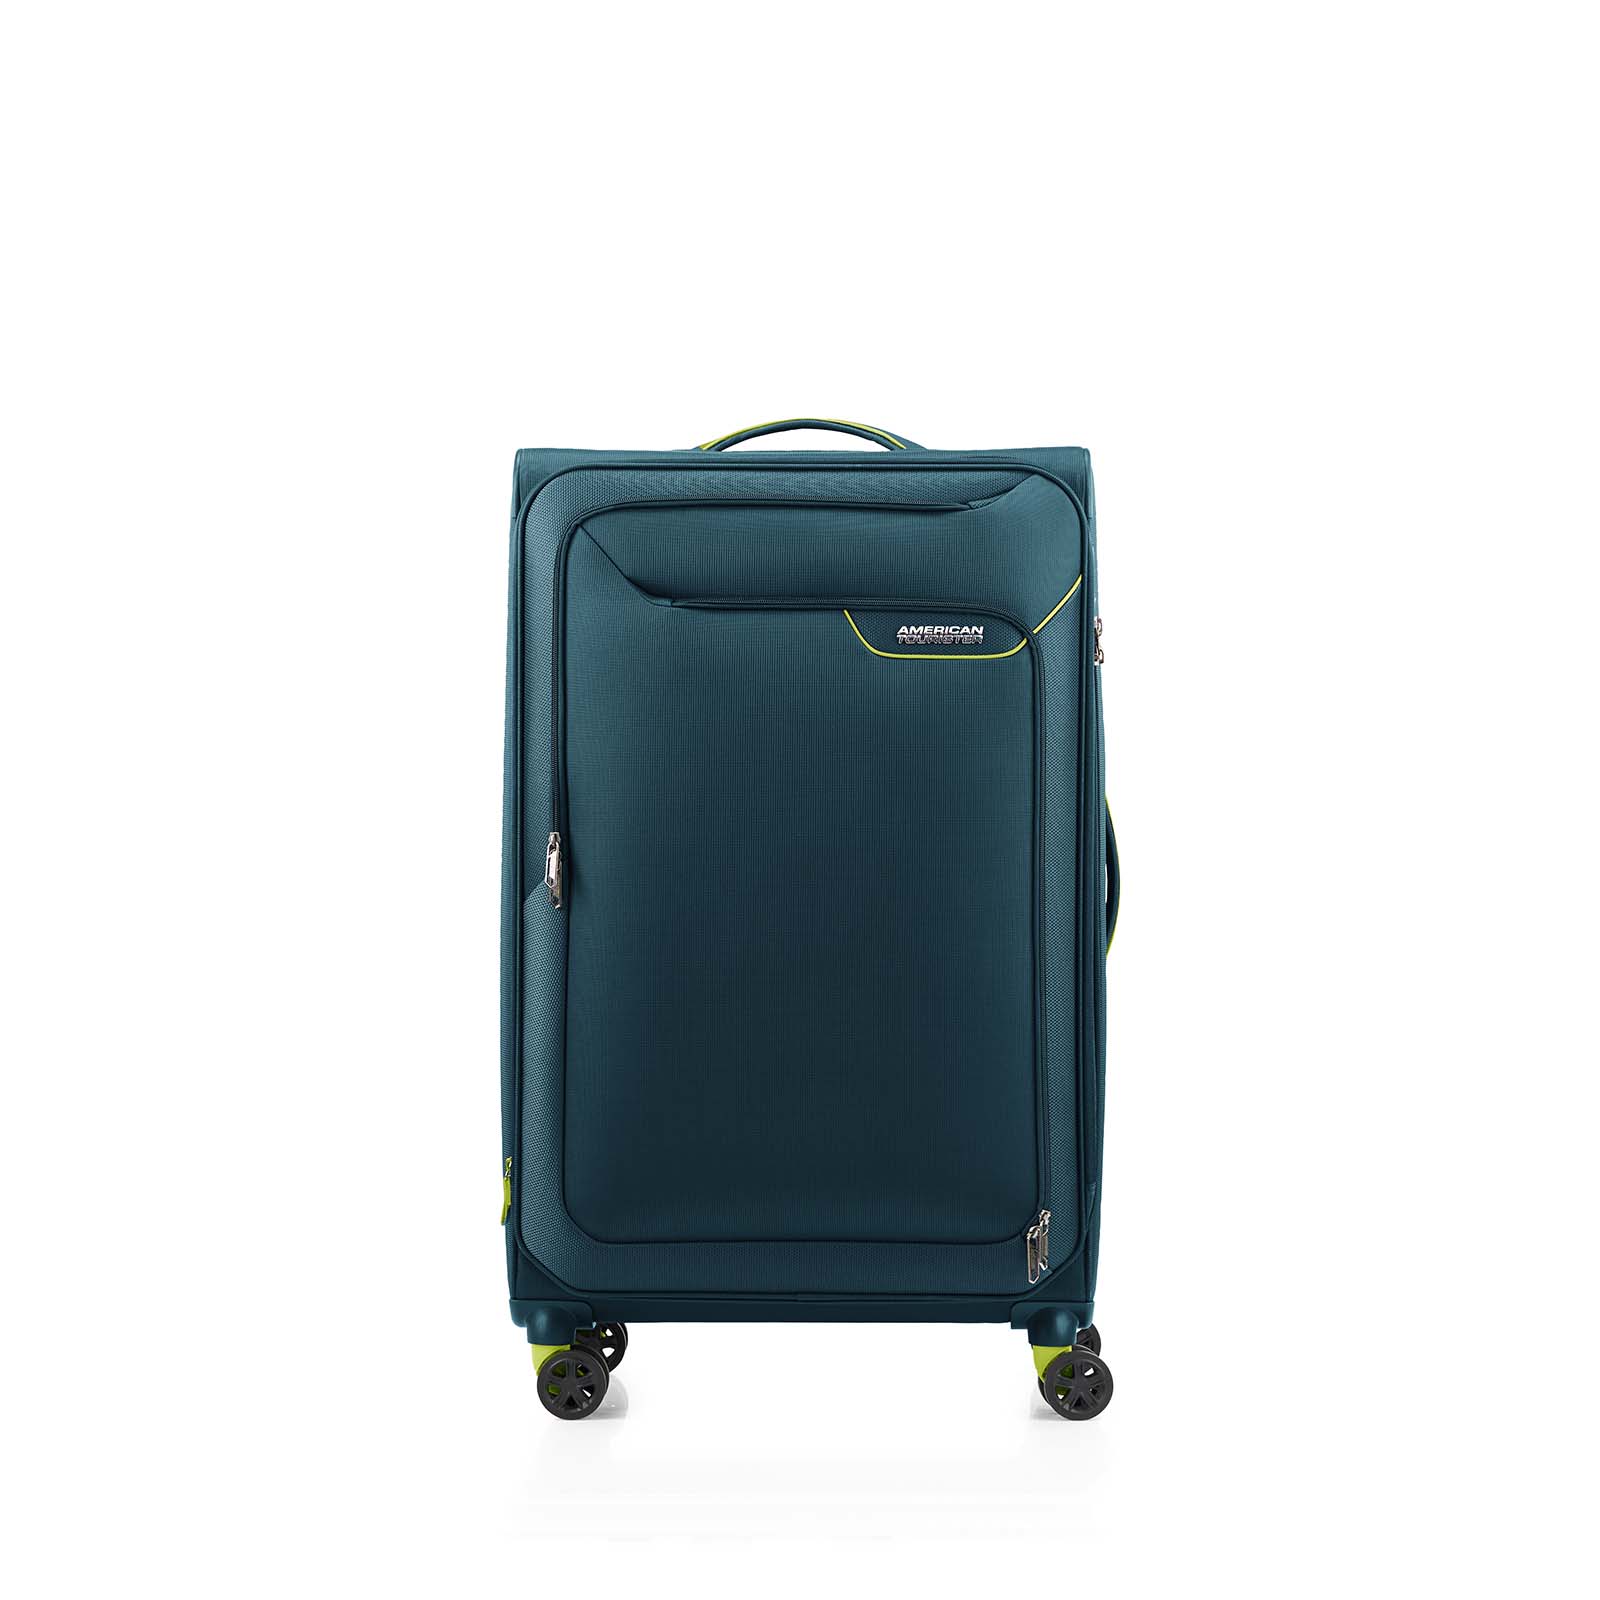 American-Tourister-Applite-4-Eco-82cm-Suitcase-Varsity-Green-Front